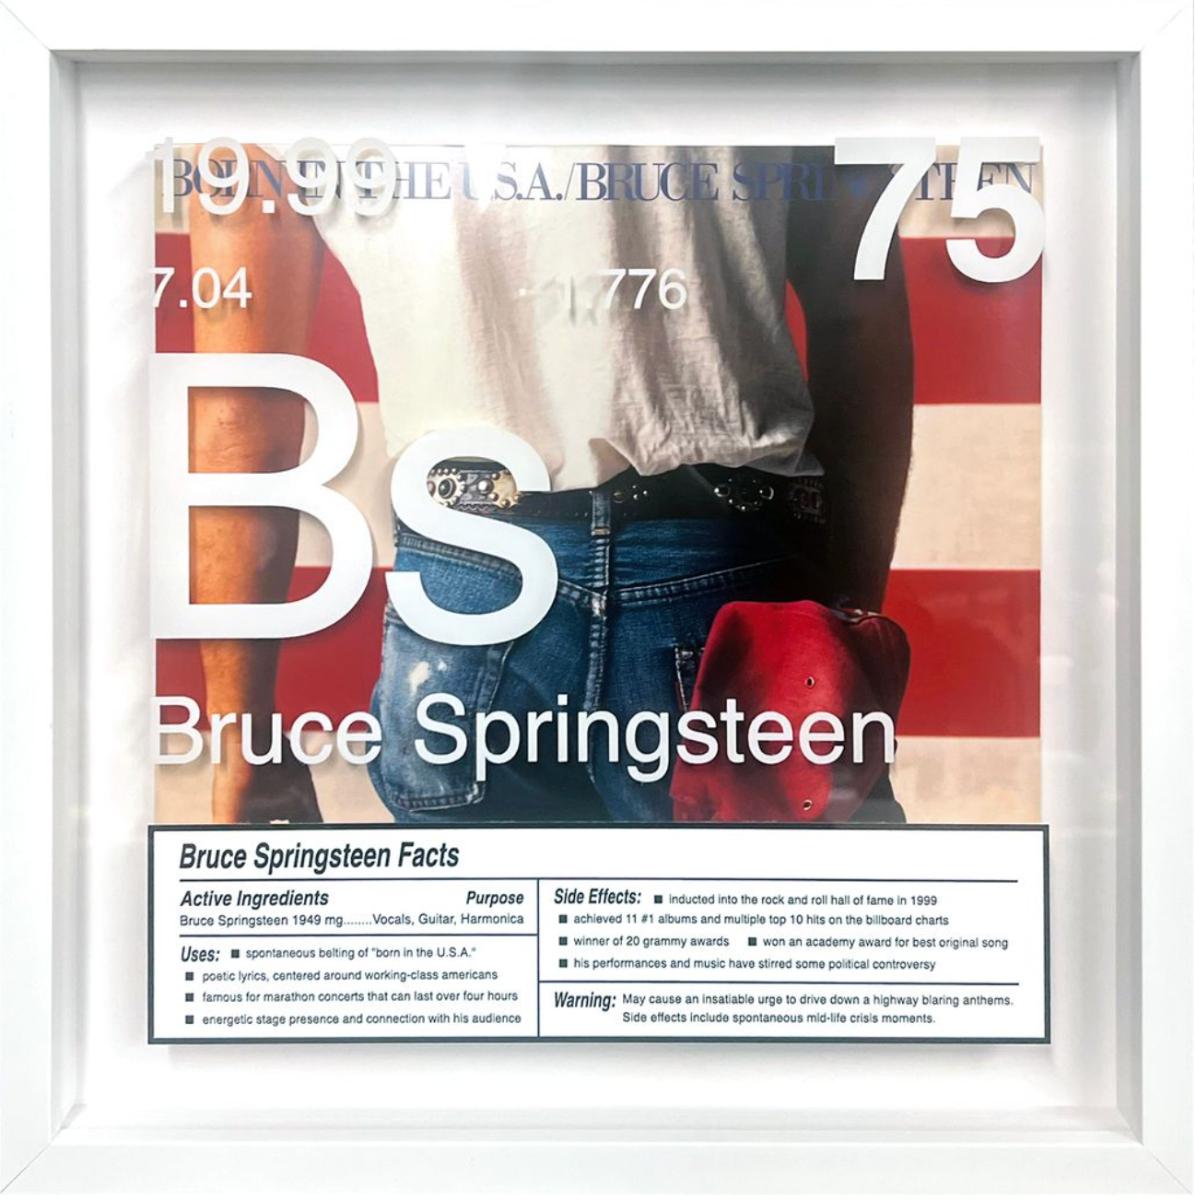 Boss _73 or _75 Limited edition 5/9

Daniel Allen Cohen, a Los Angeles-based artist renowned for his multidisciplinary approach, transforms popular culture into conceptual art. His creations are nuanced reflections of societal values, desires,